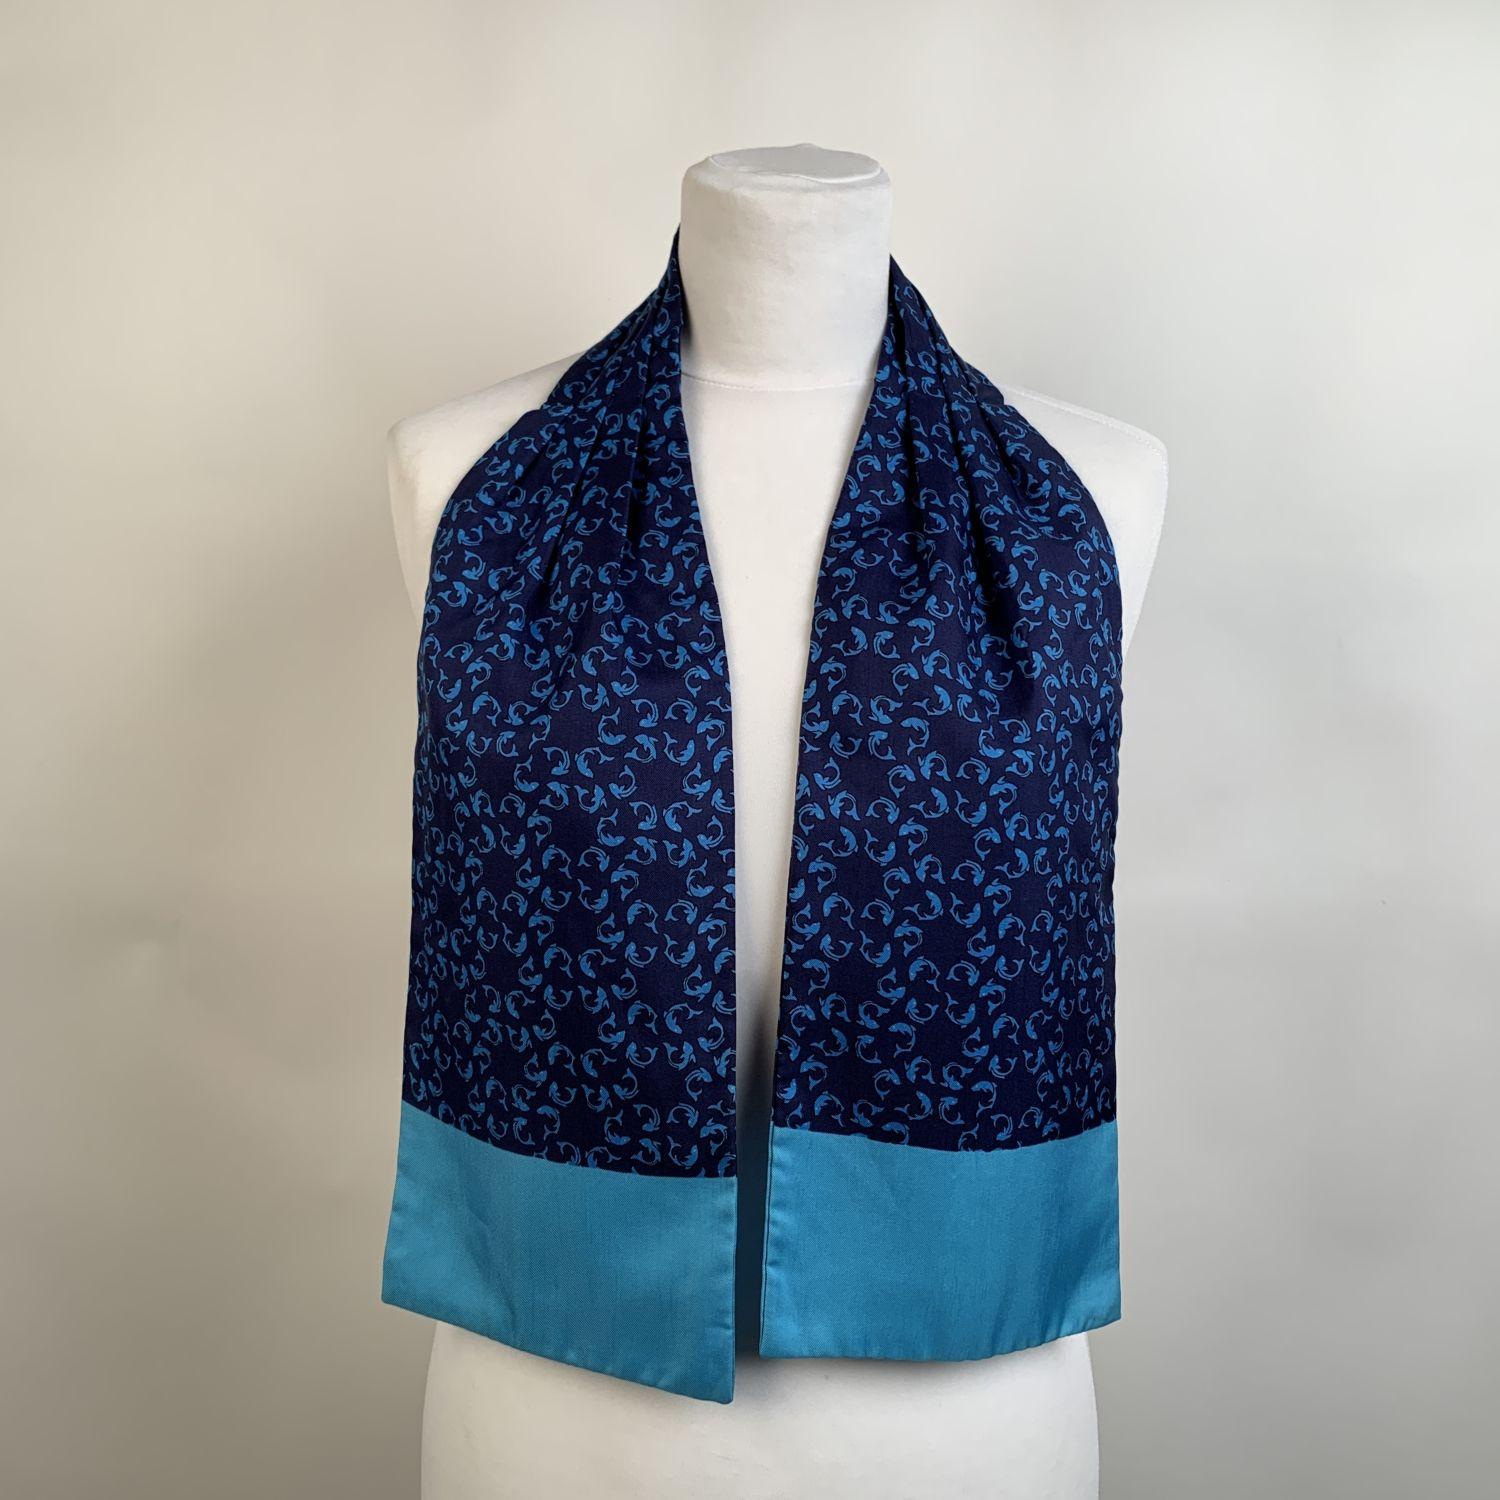 Sophisticated ascot scarf by HERMES, featuring turquoise fish pattern on blue background. Pleated,stitched center section. Both suitable for man or woman can be worn in many different ways: as an ascot, at neck, in hair, as a belt or tied on your